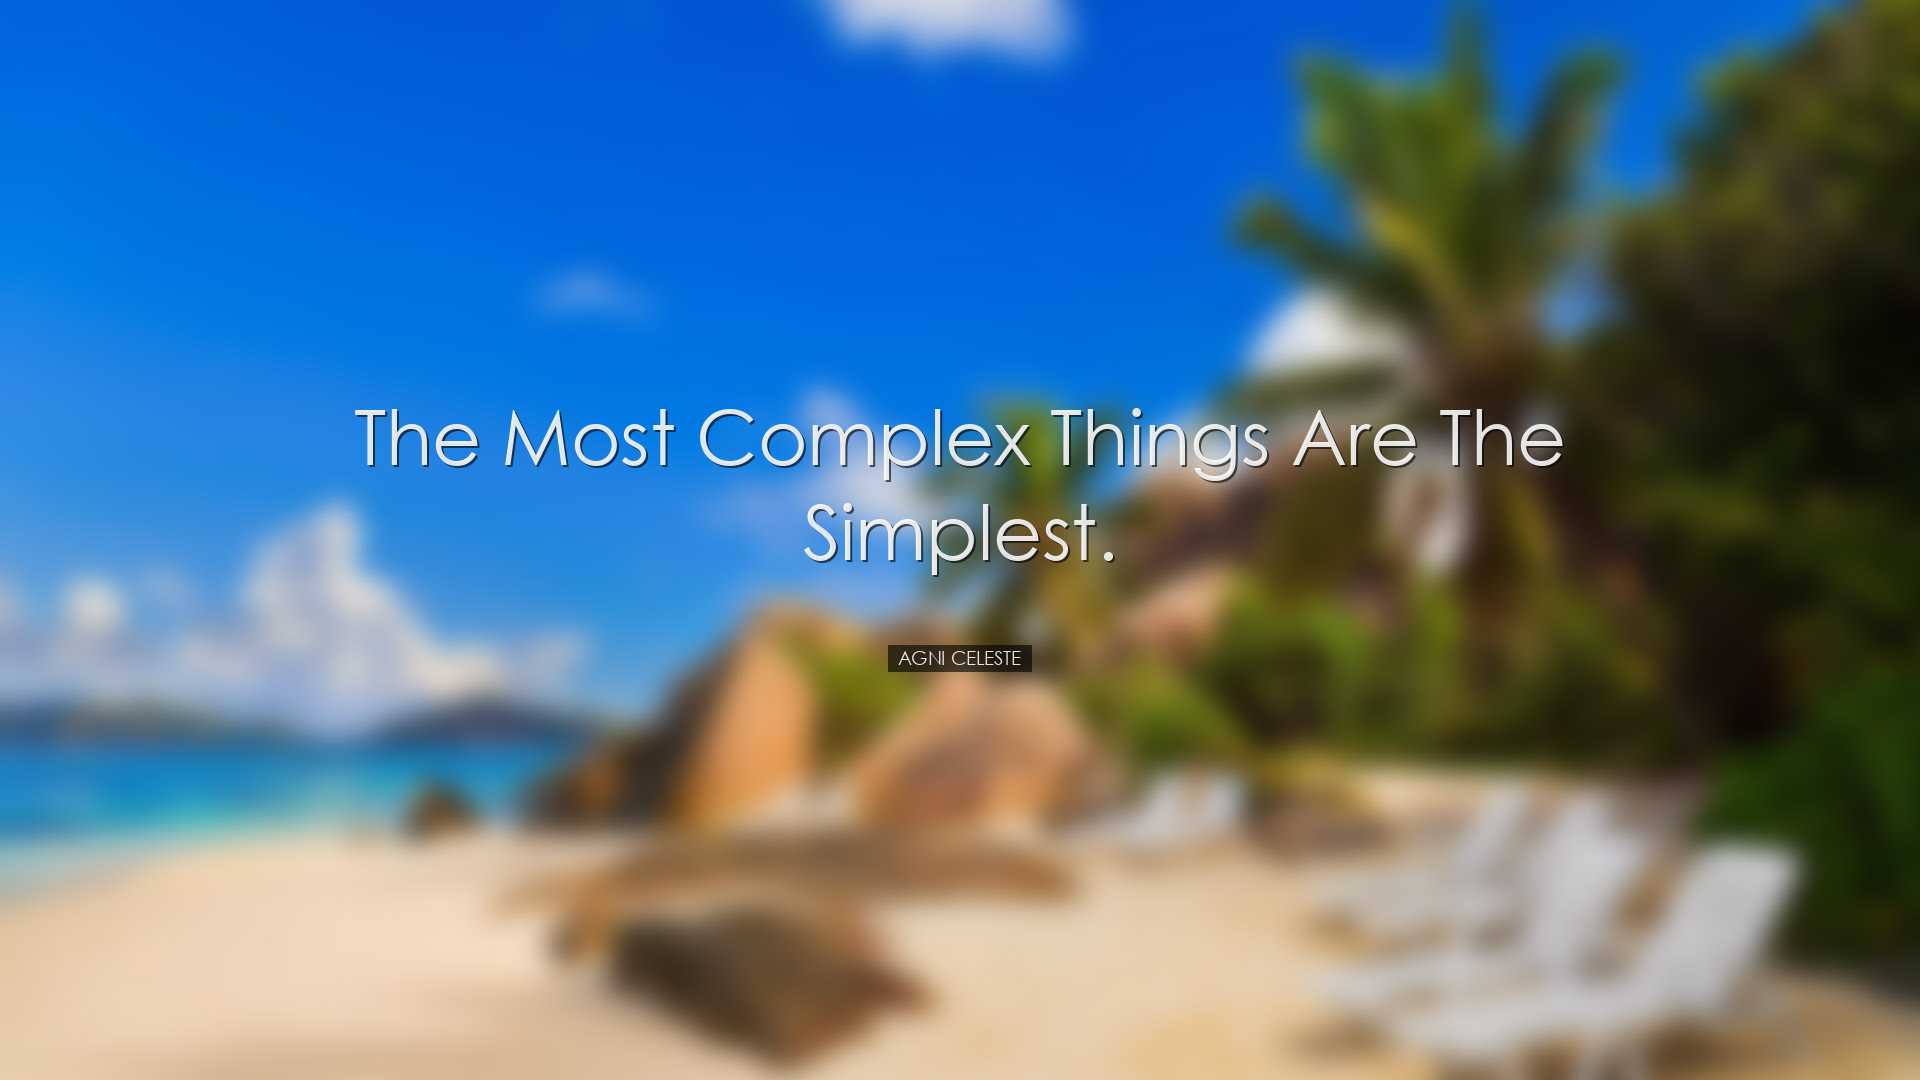 The most complex things are the simplest. - Agni Celeste